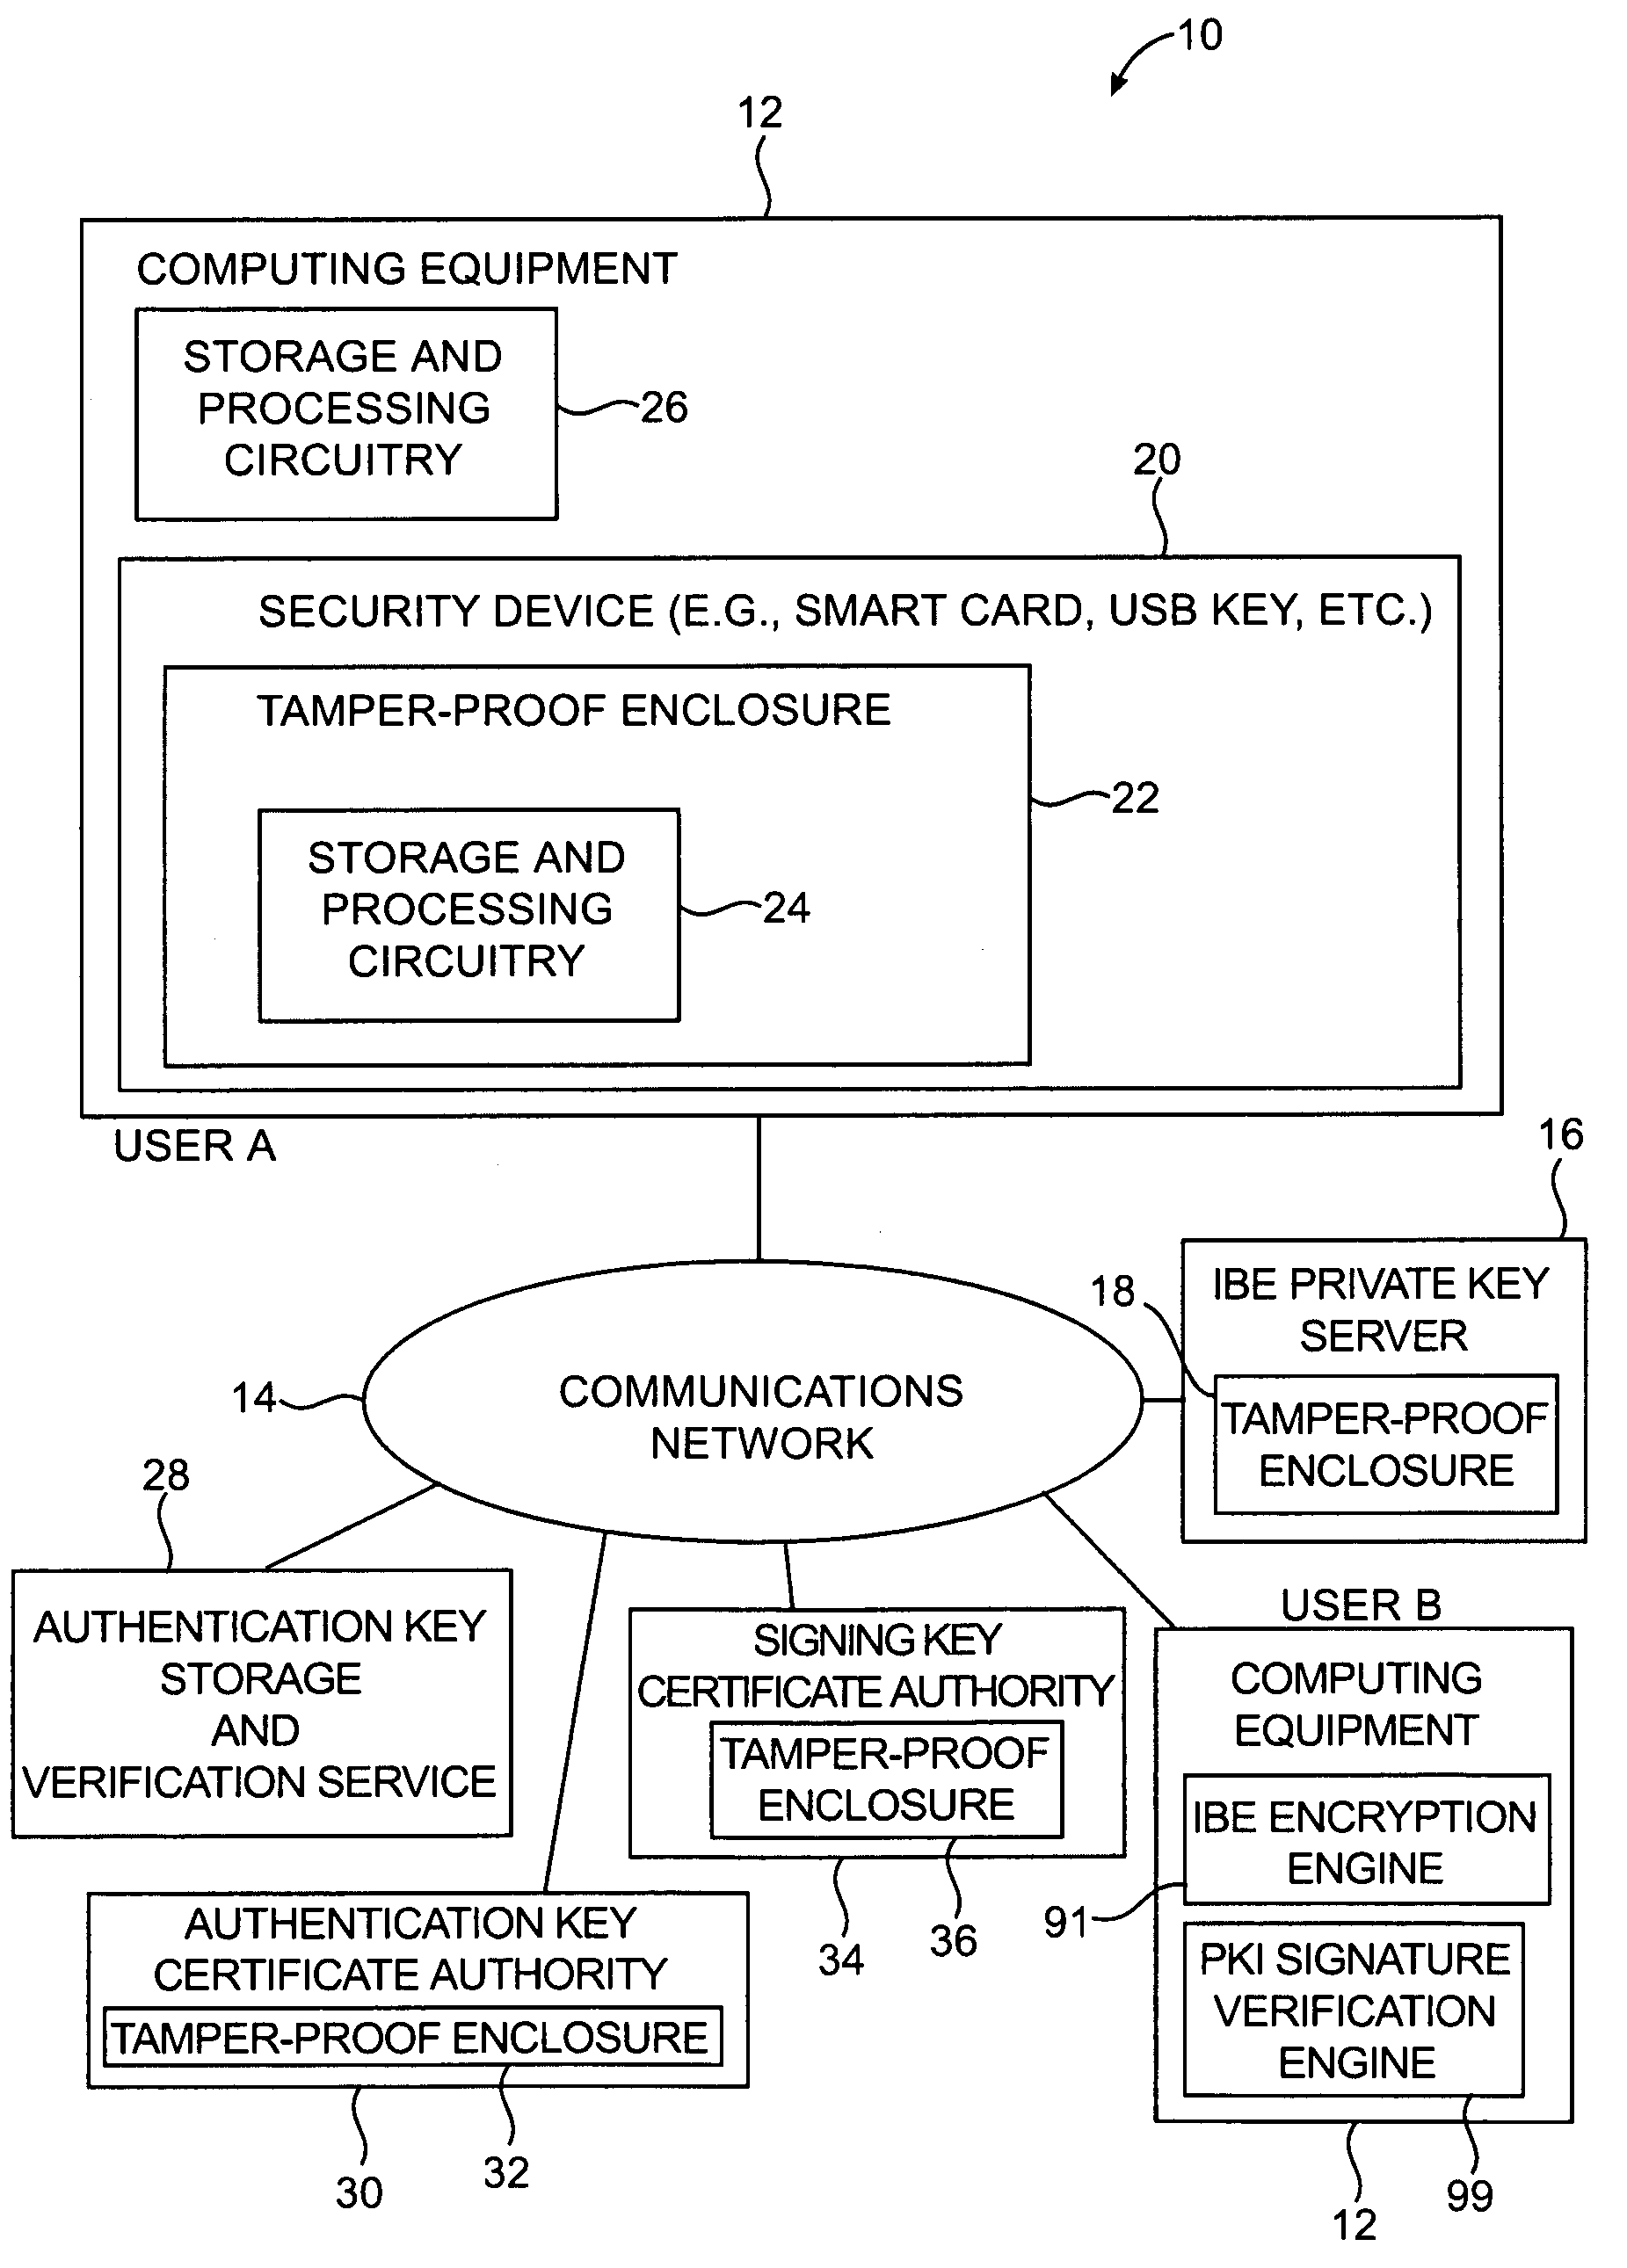 Security device for cryptographic communications